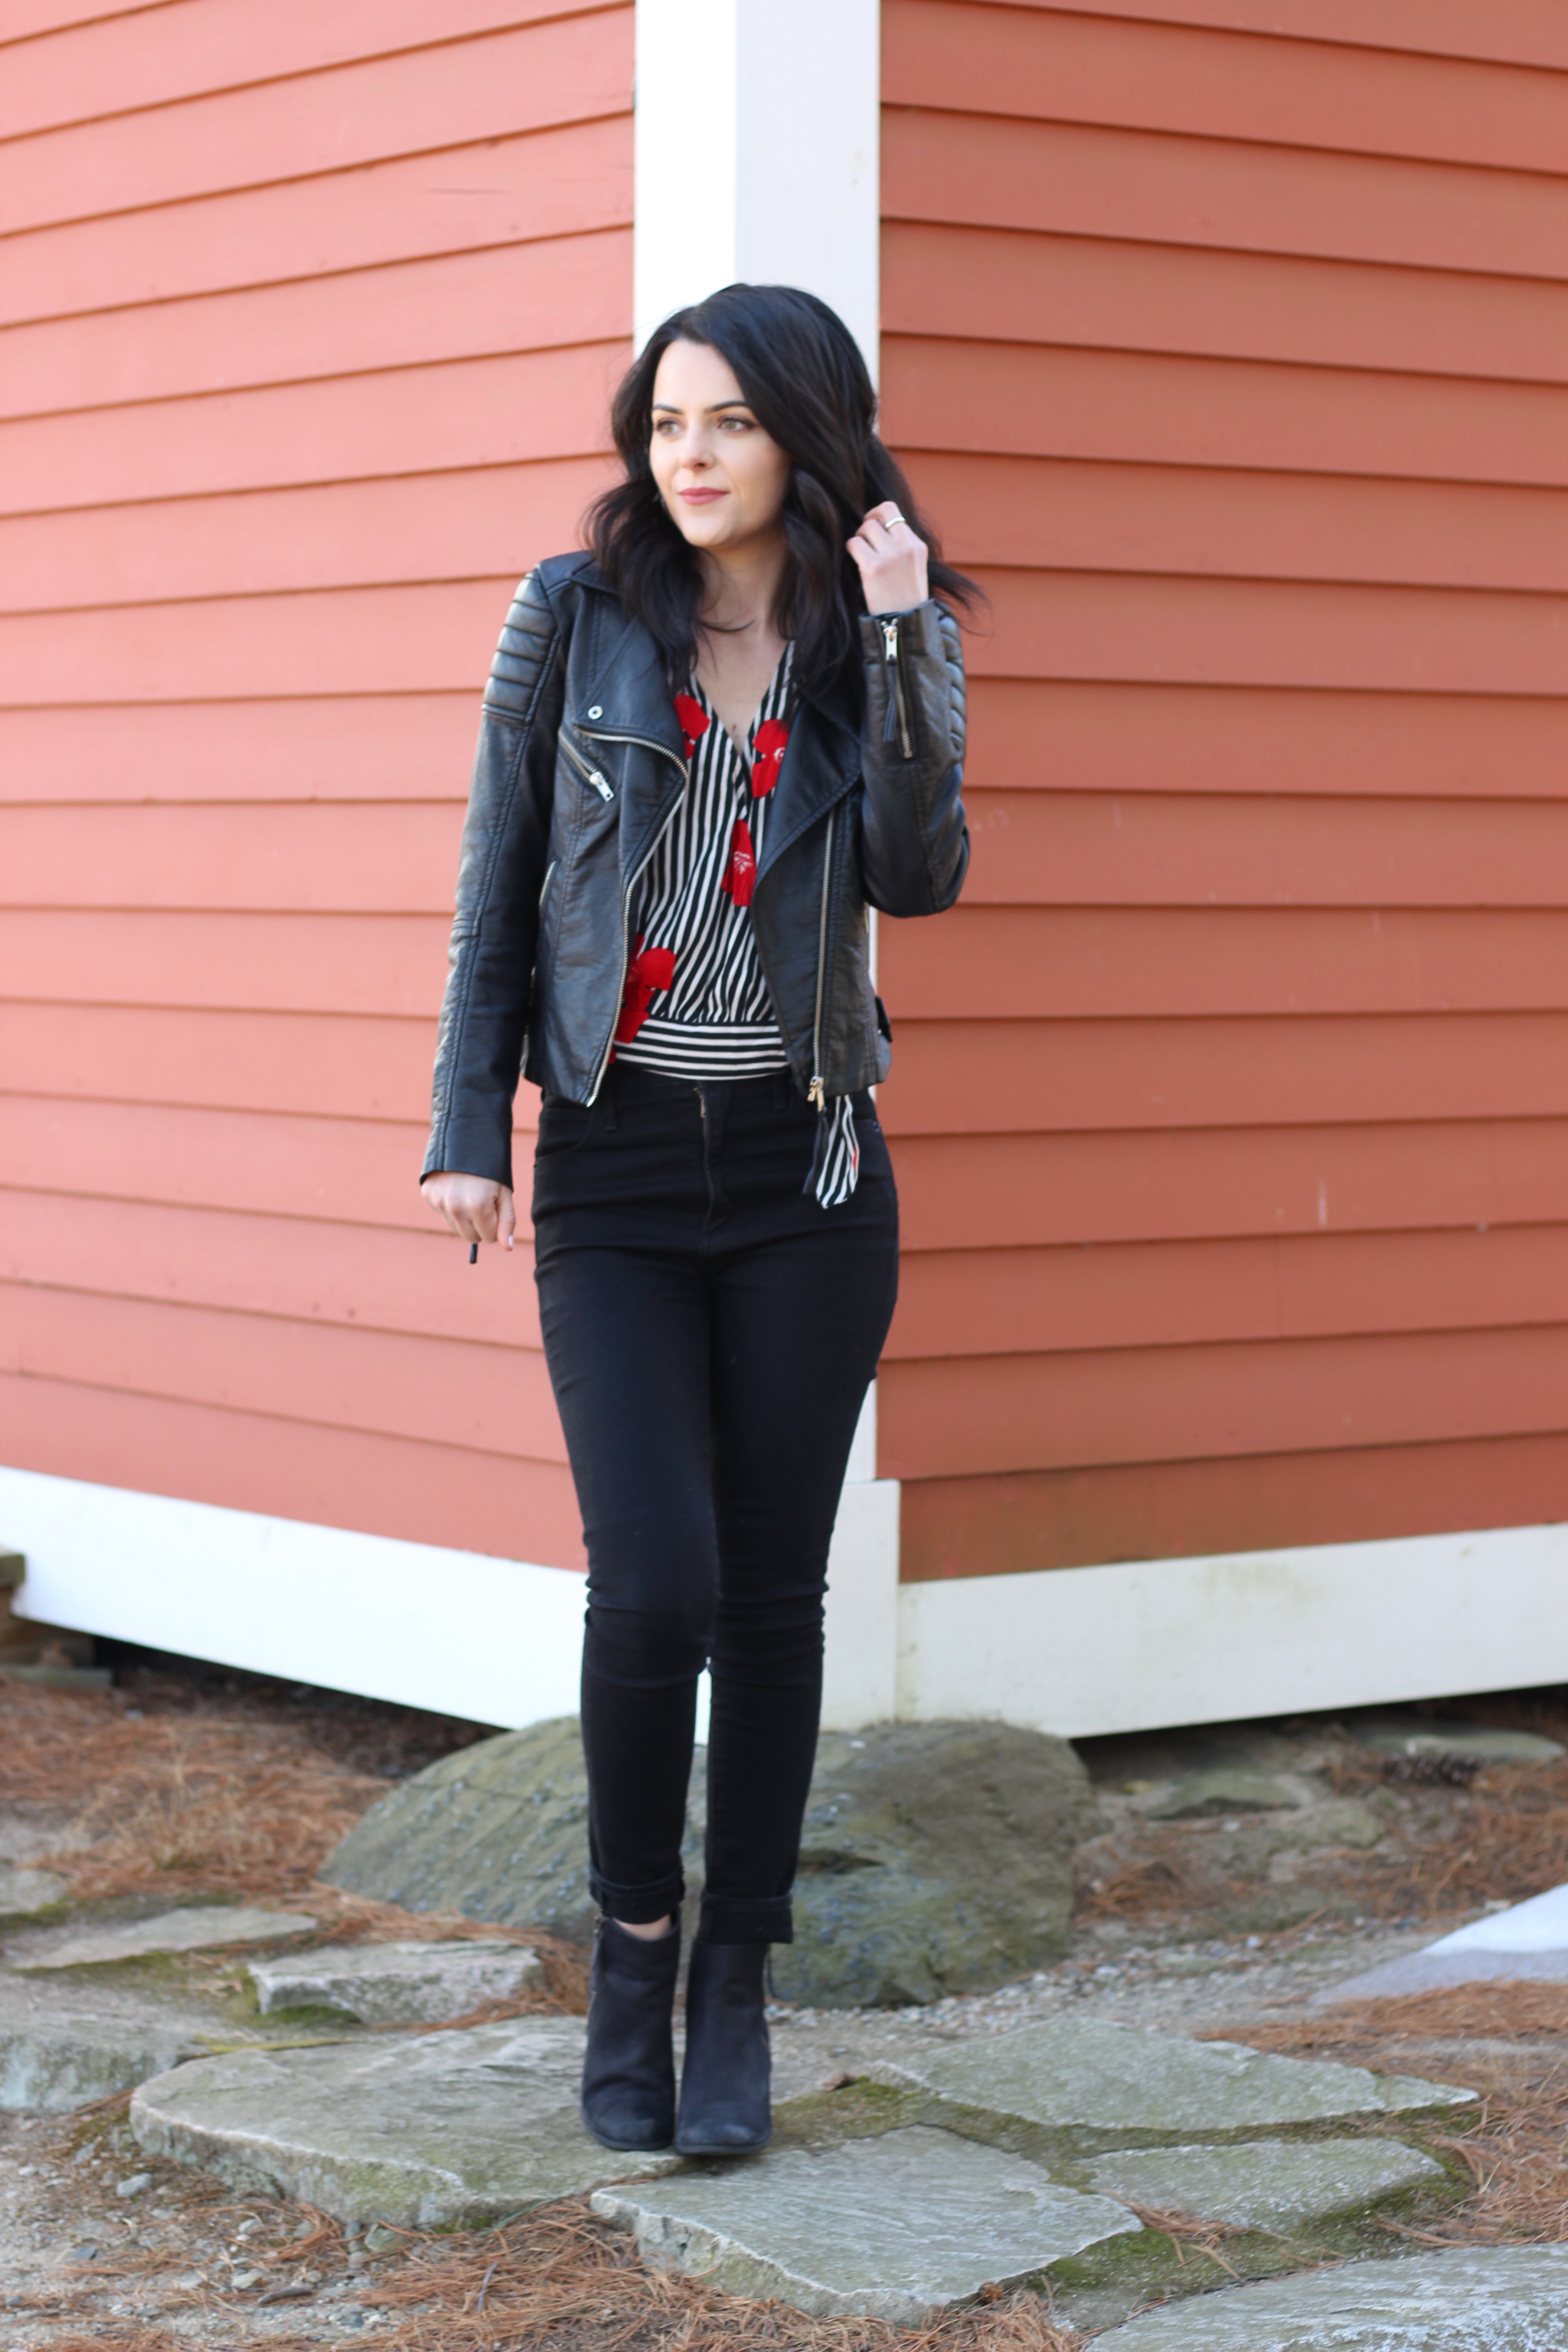 Valentine's Day Outfit + Easy Dessert